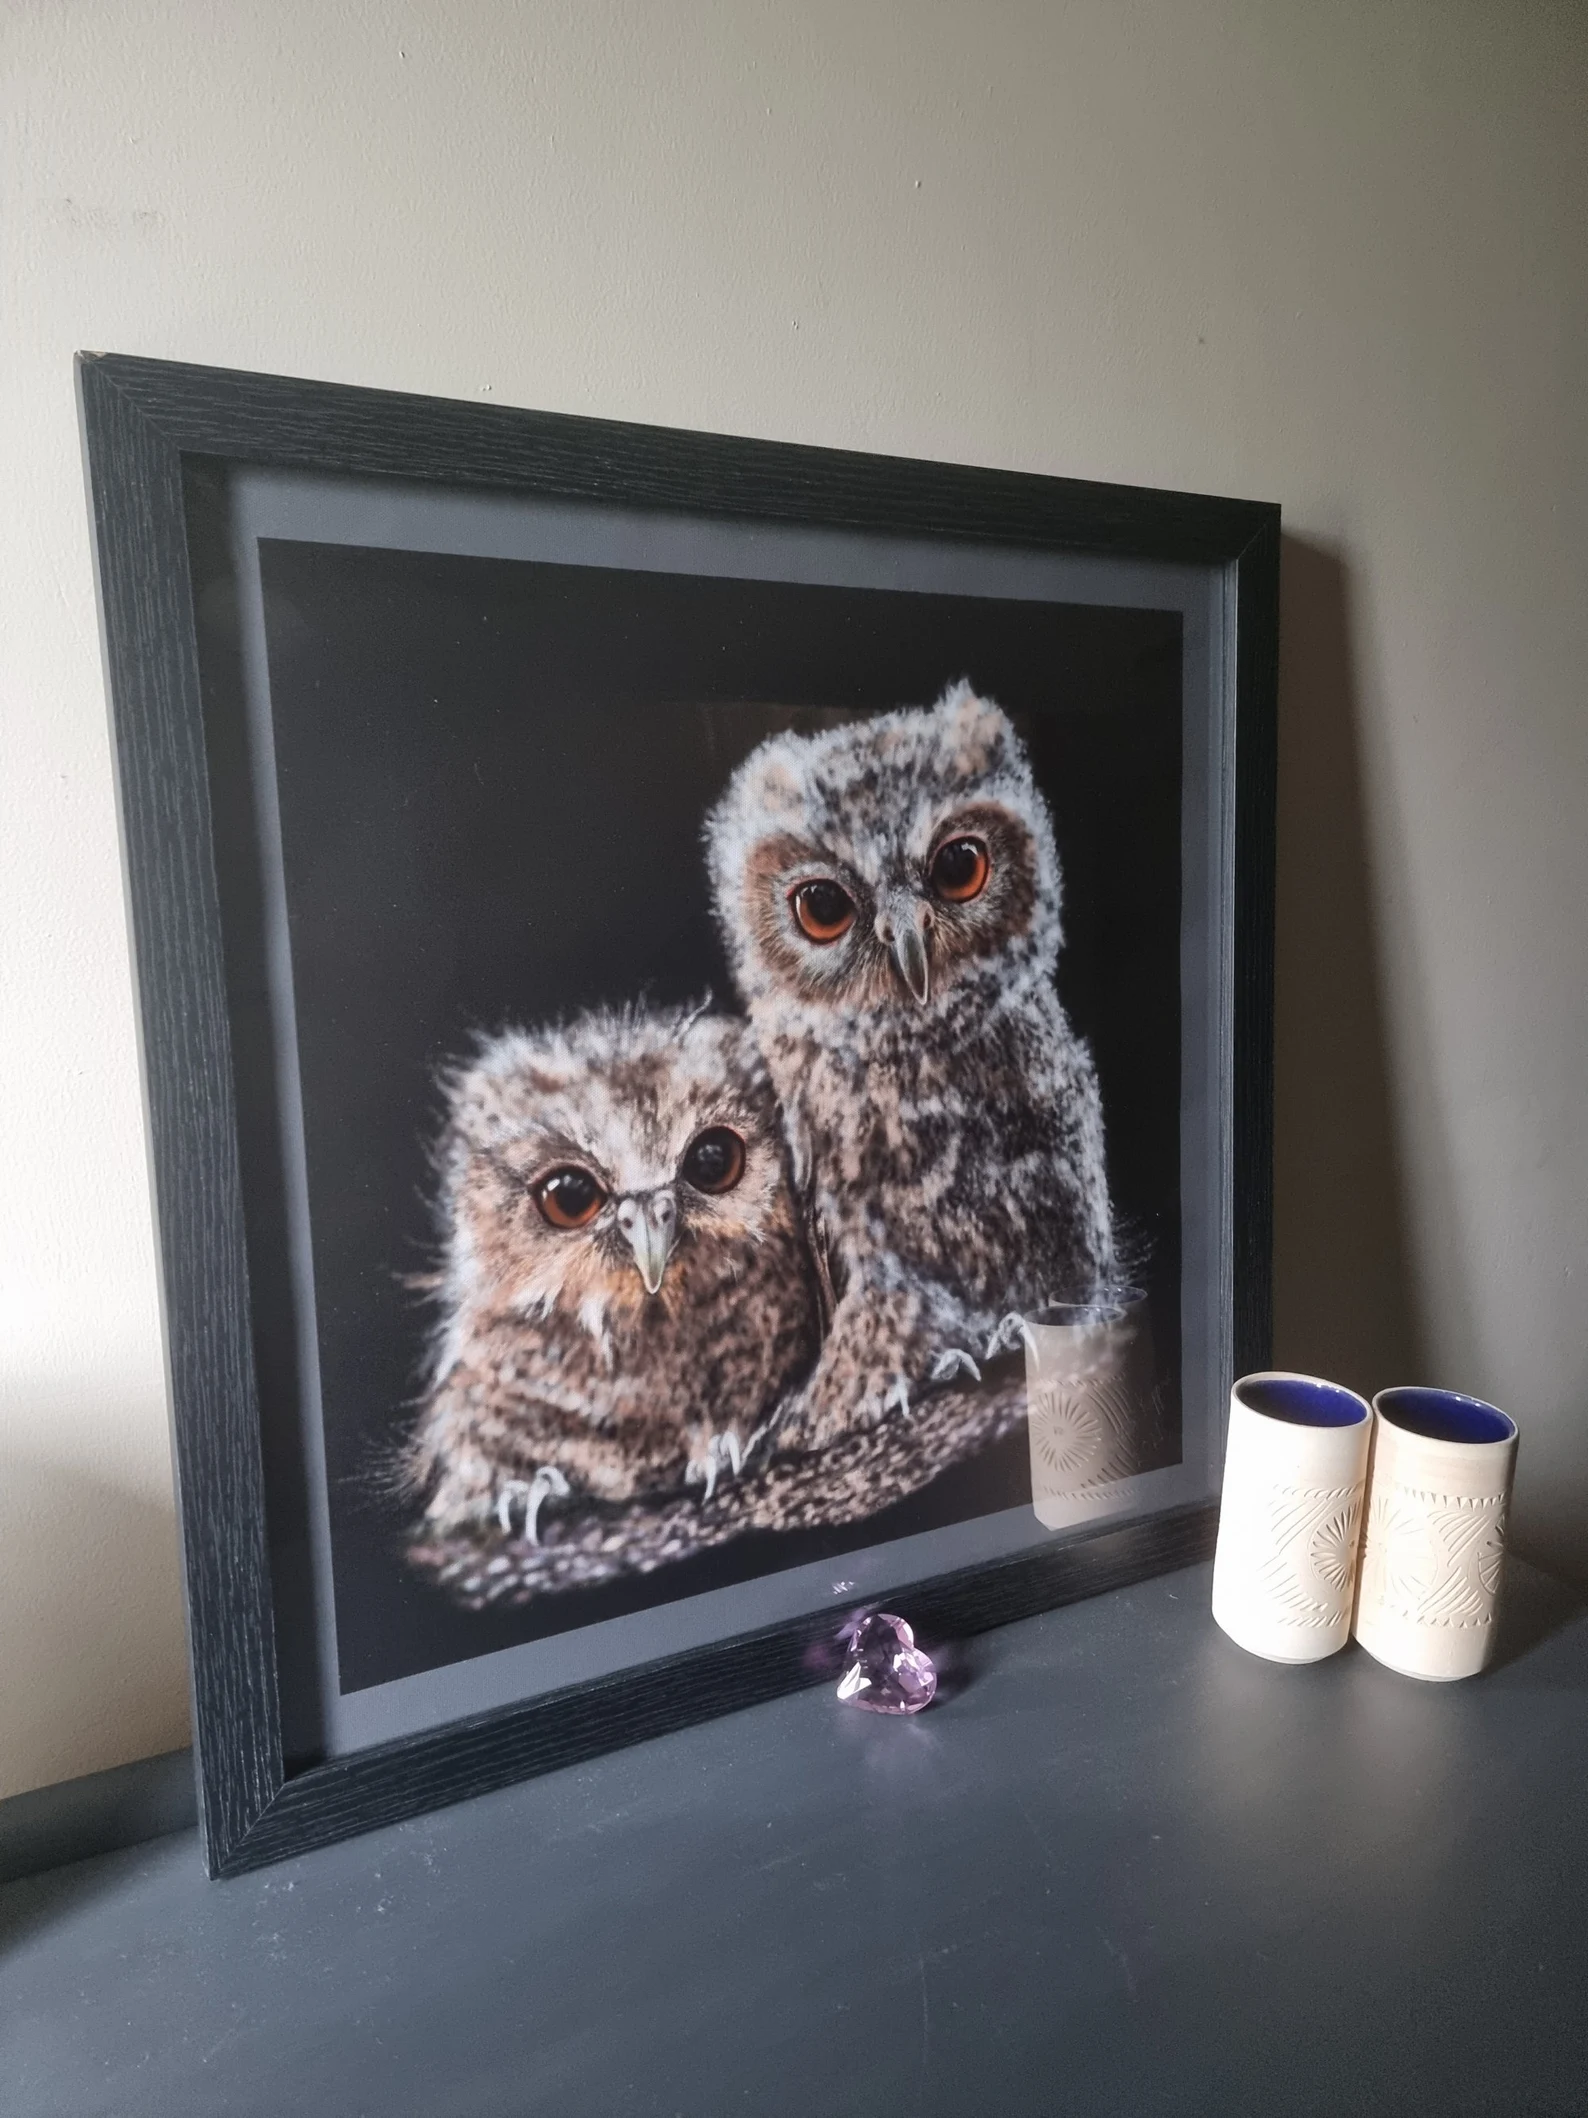 Digital art design of two tawny owls produced by one of the startups on the programme